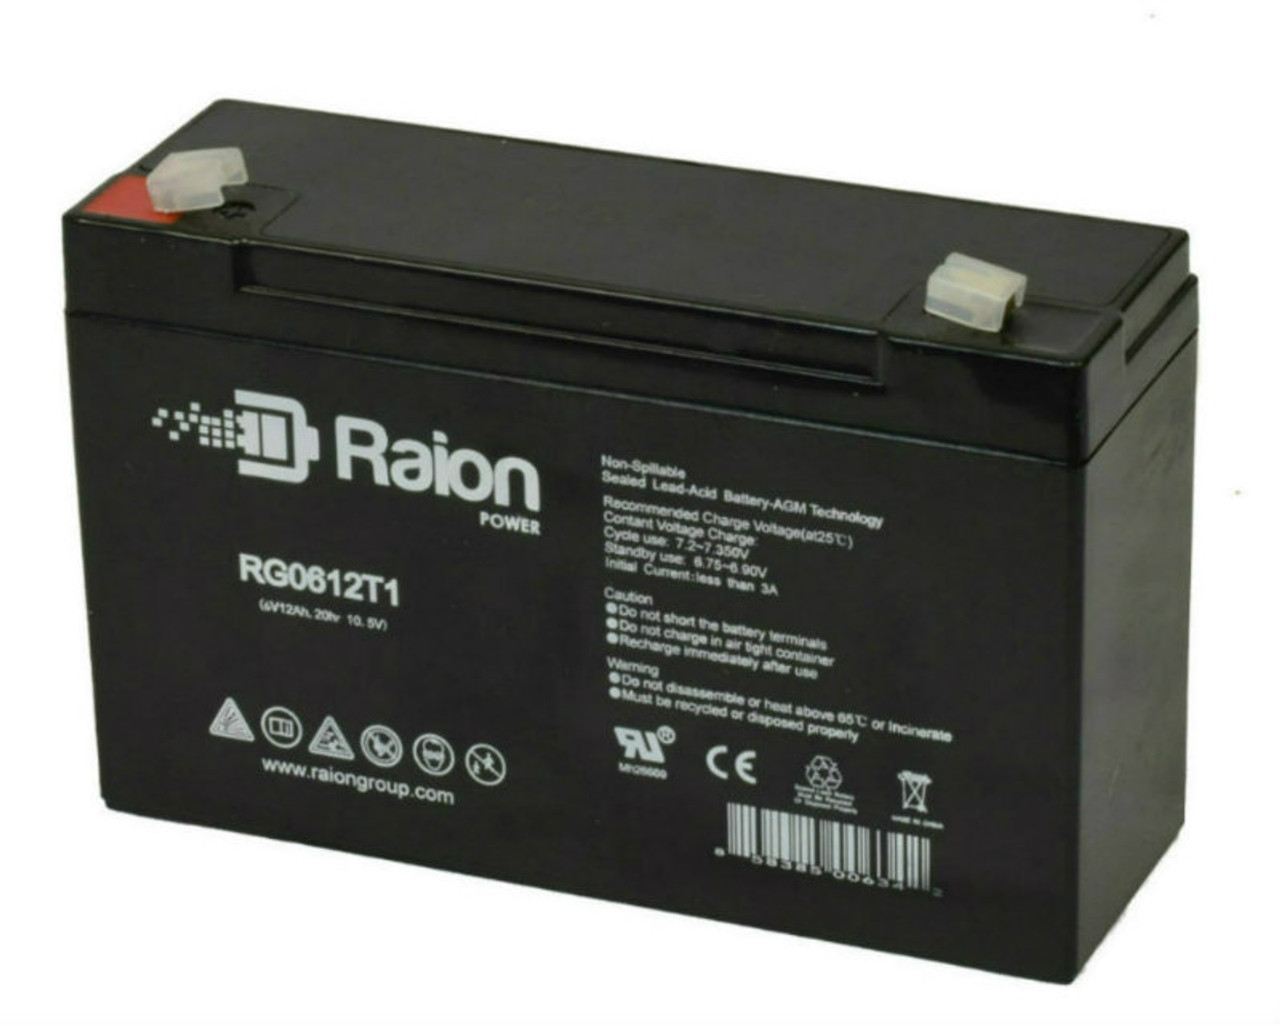 Raion Power RG06120T1 Replacement Battery for Consent GS612